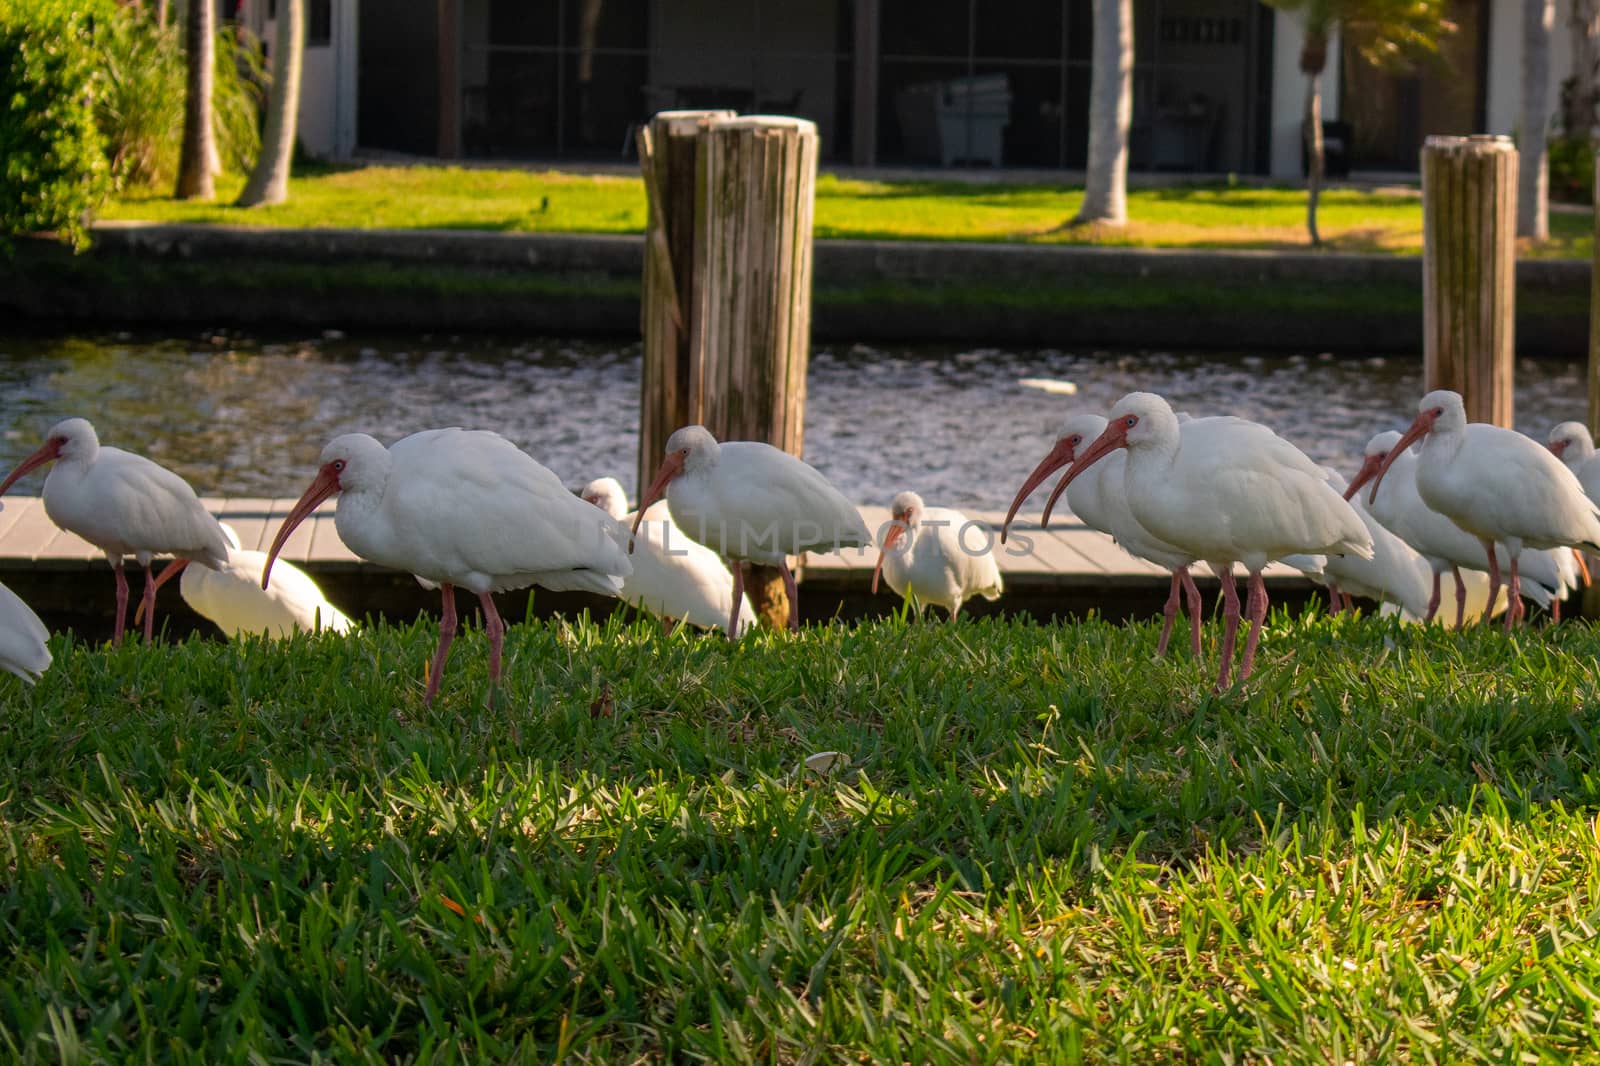 A Flock of Male White Ibis on a Grass Lawn With a Pier Behind Th by bju12290